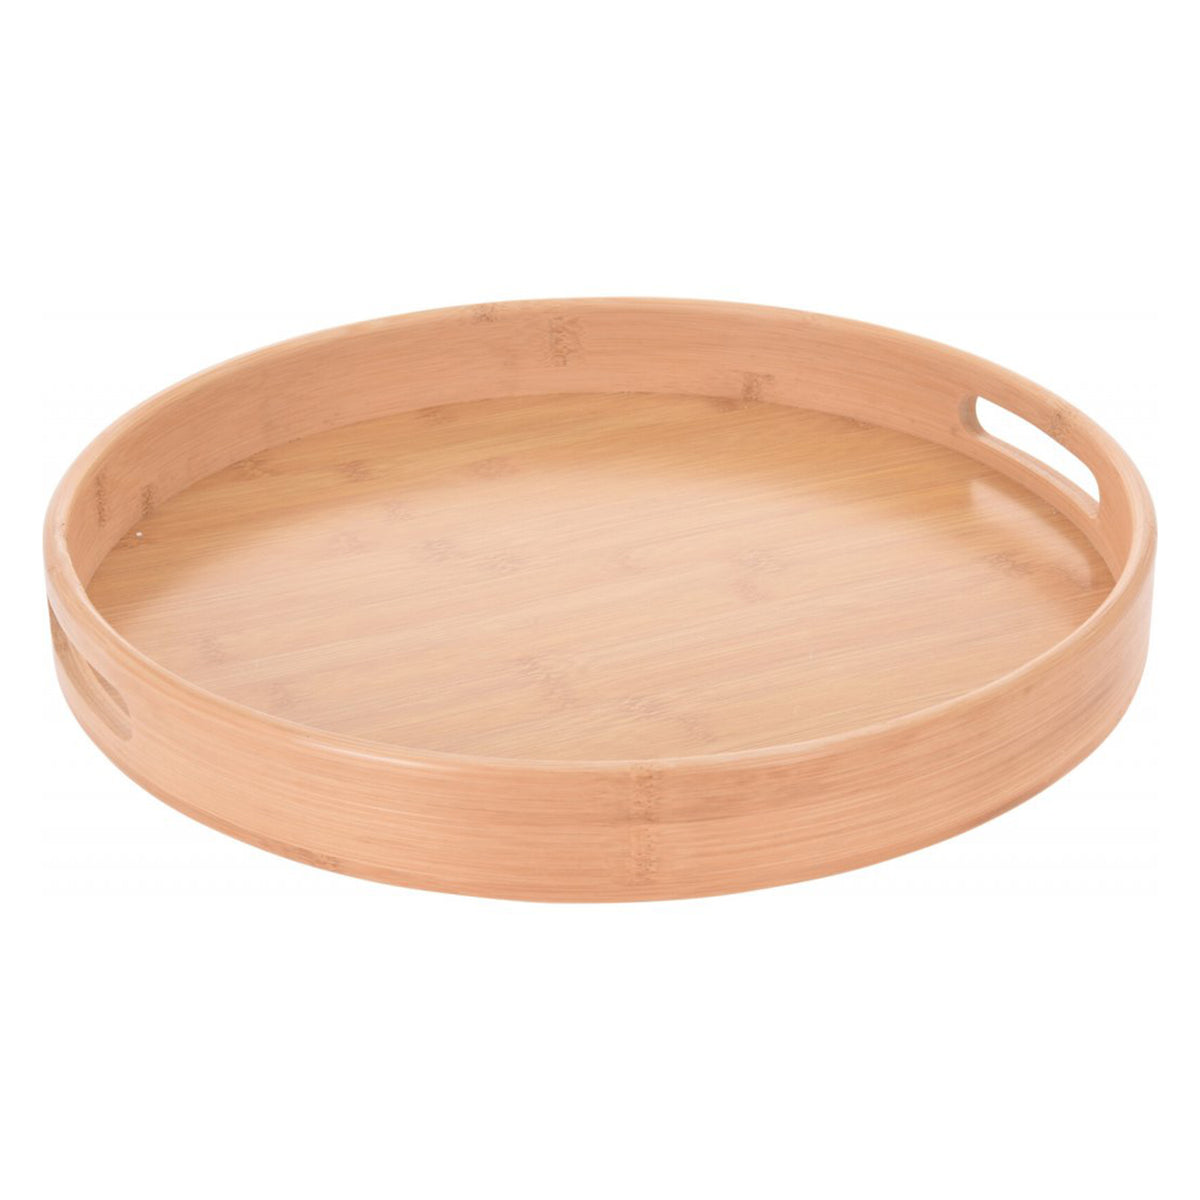 Bamboo Round Serving Tray - 40 cm